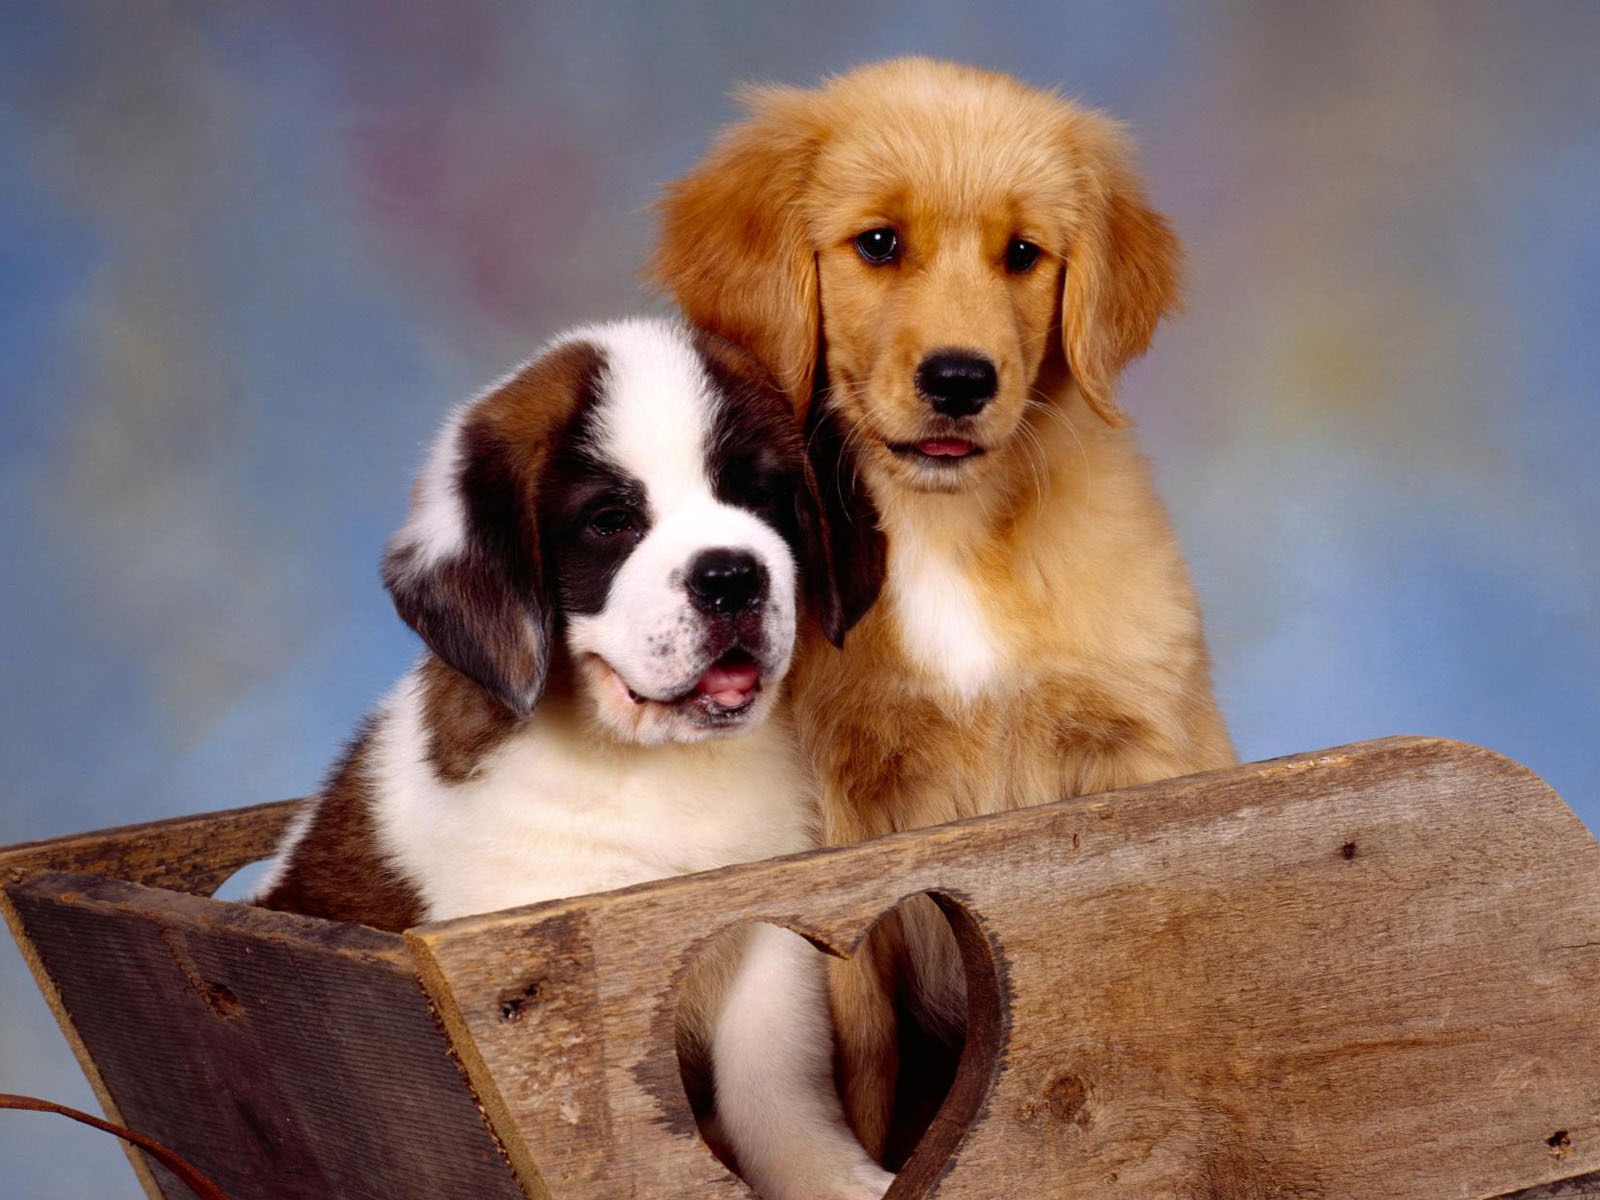 Puppy Photo HD wallpapers (2) #7 - 1600x1200